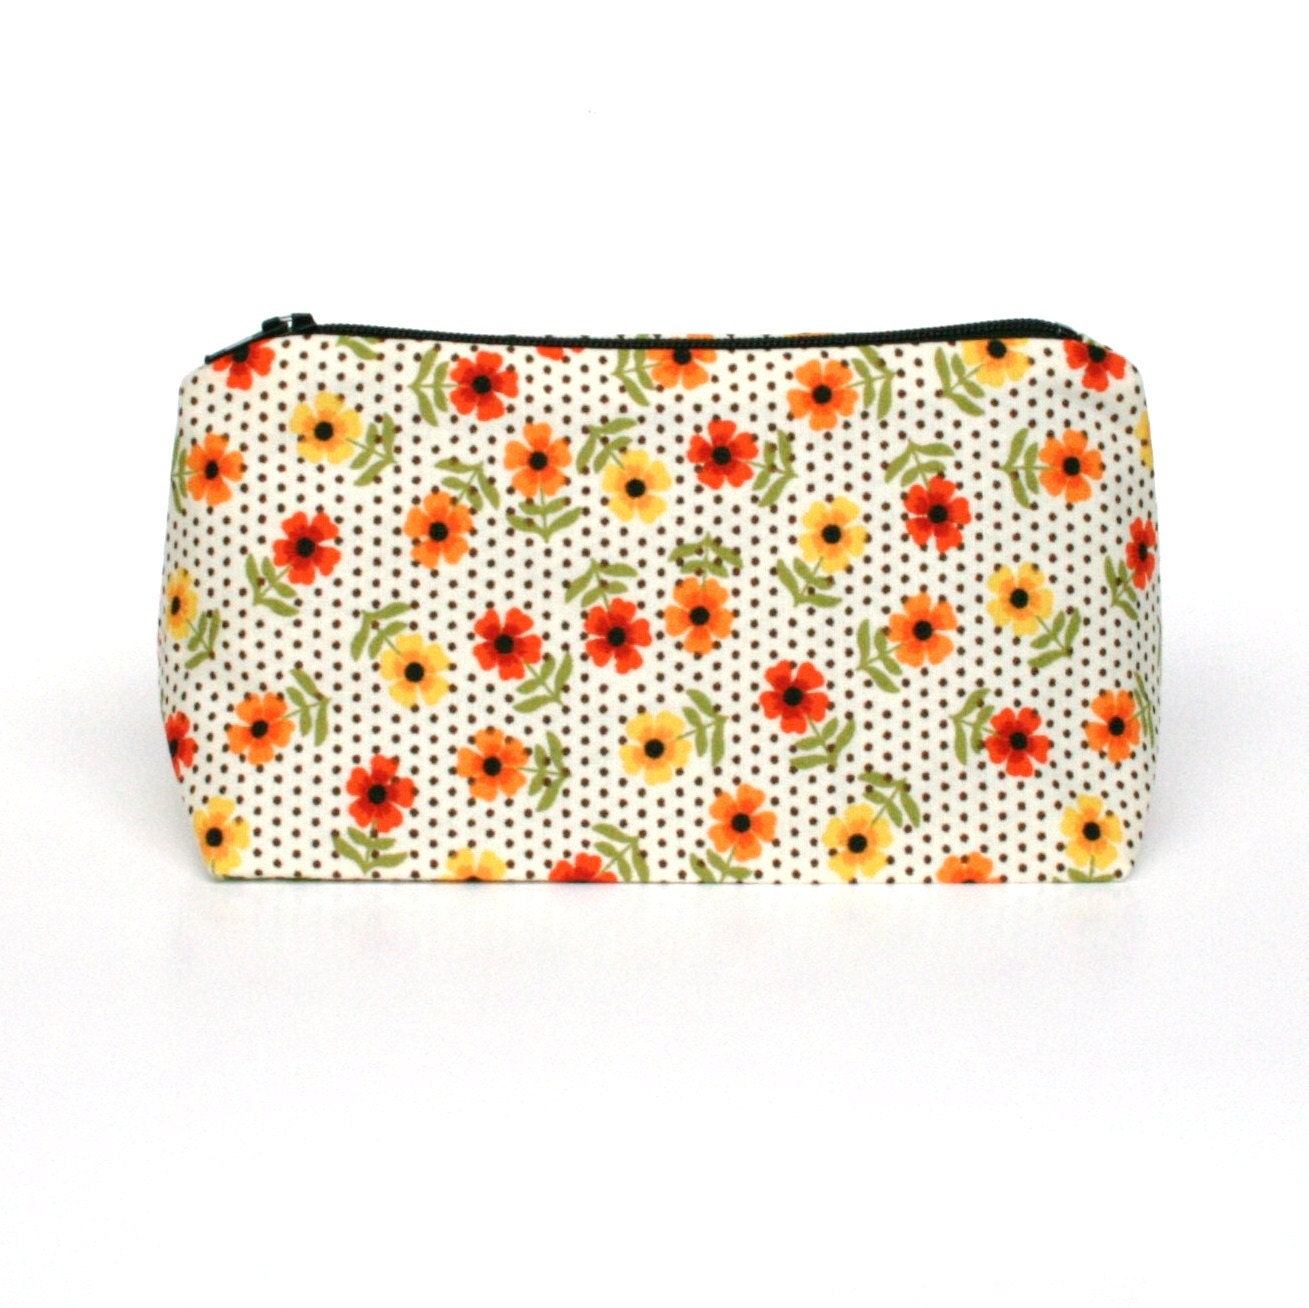 Cosmetic Case in Polka Dot Daisy Poppy- Cosmetic Bag - Country Chic Wedding Bridesmaid Gift, Birthday Gift, Holiday Stocking Stuffer for Her